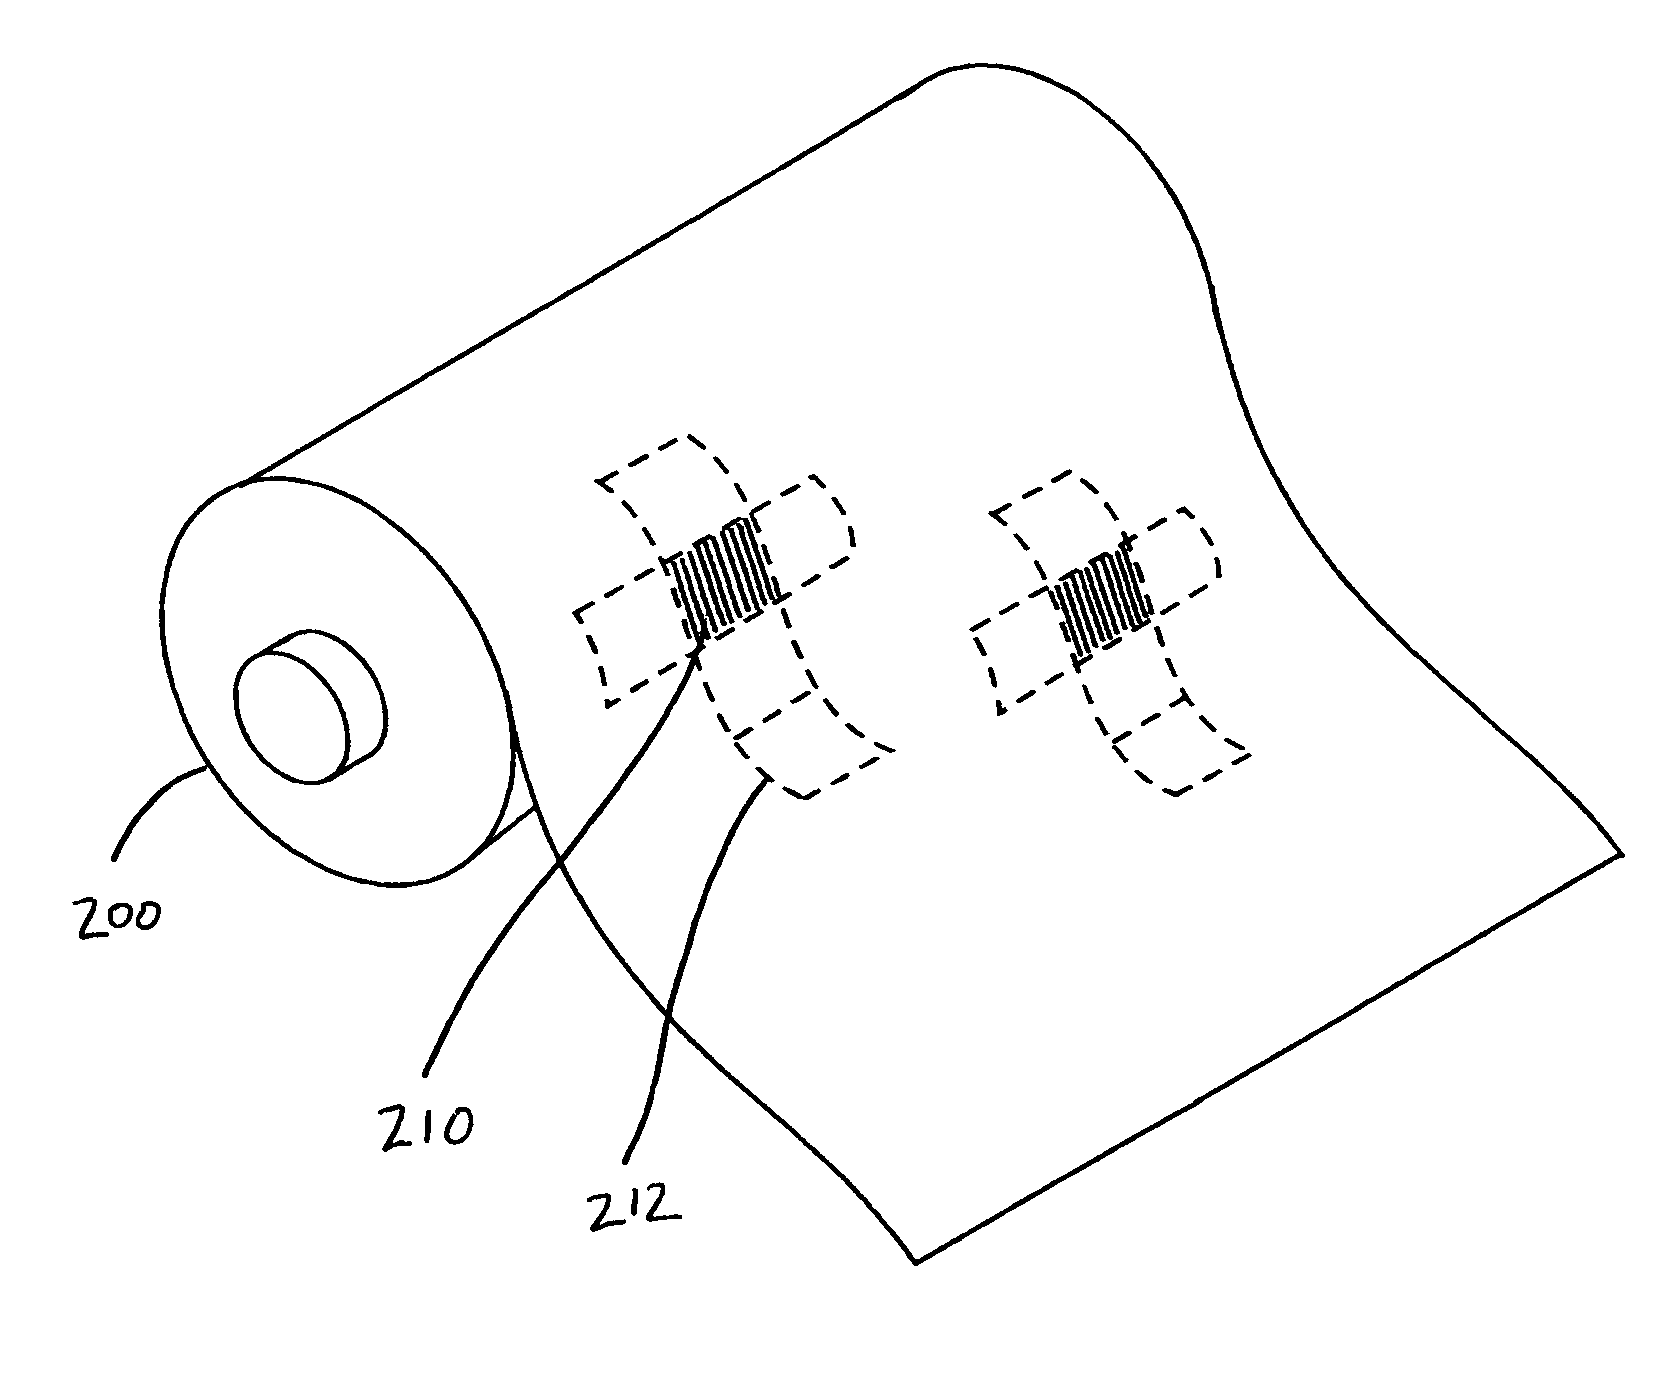 Method of producing a package from a sheet having lenticular lens in pre-selected areas